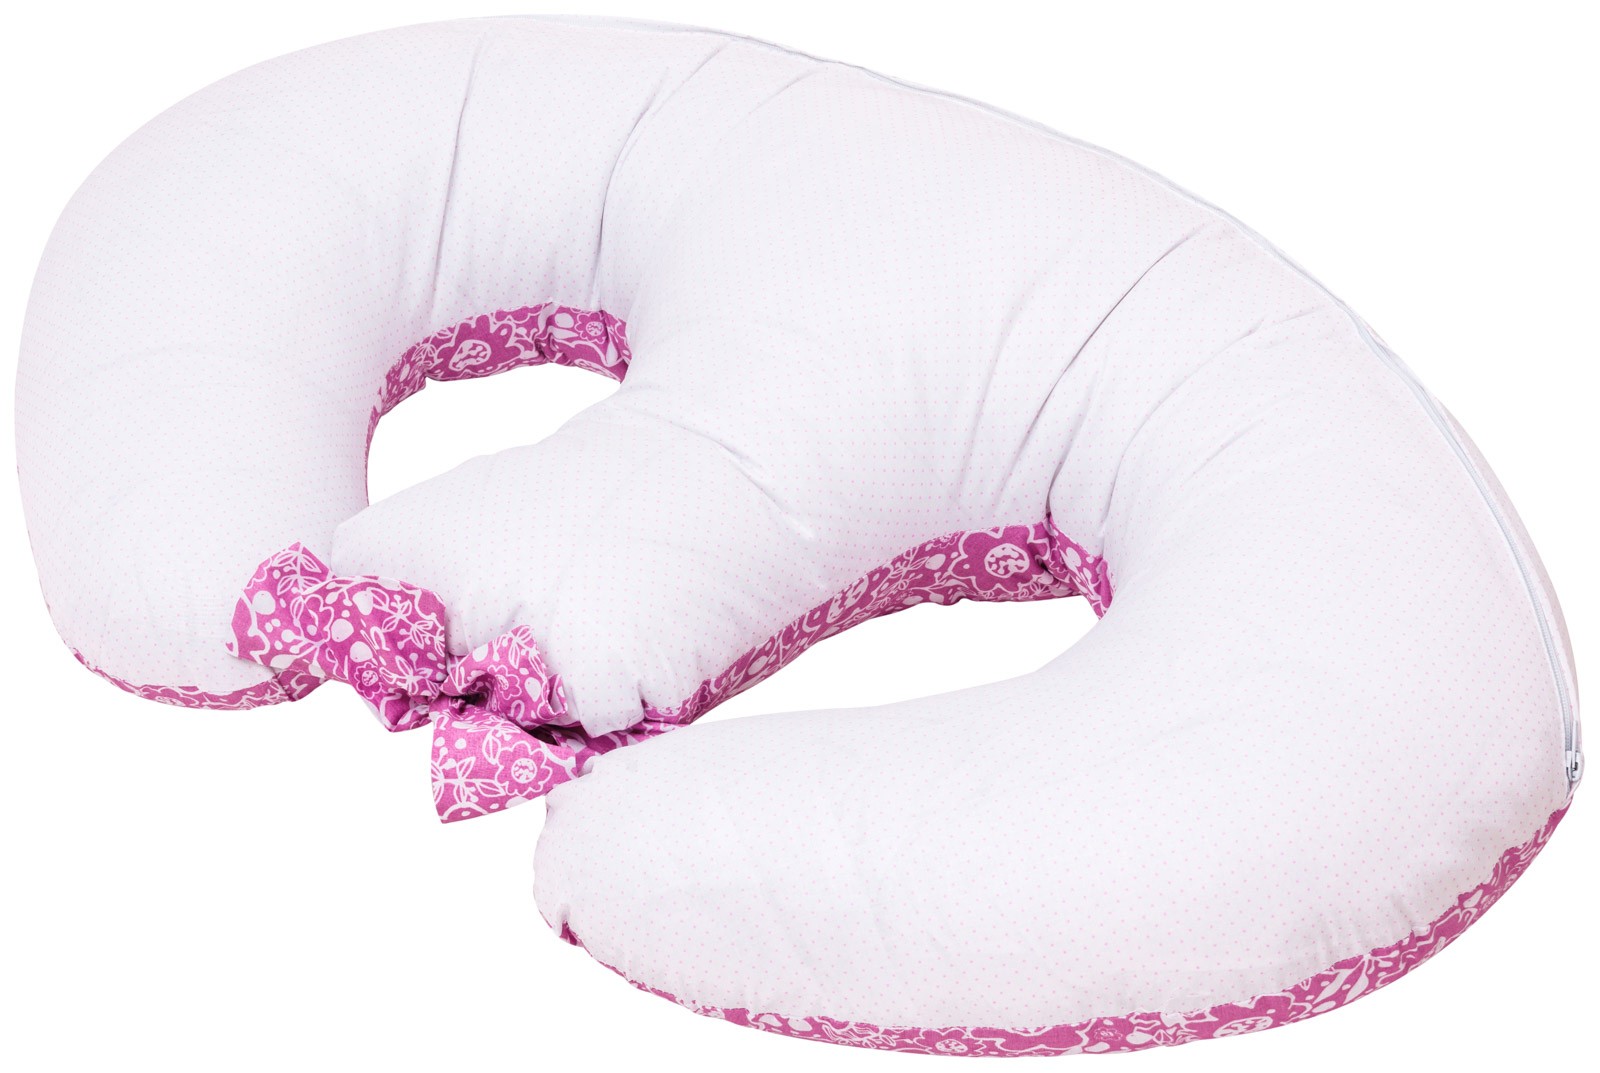 Large double pillow for twins purple caramella